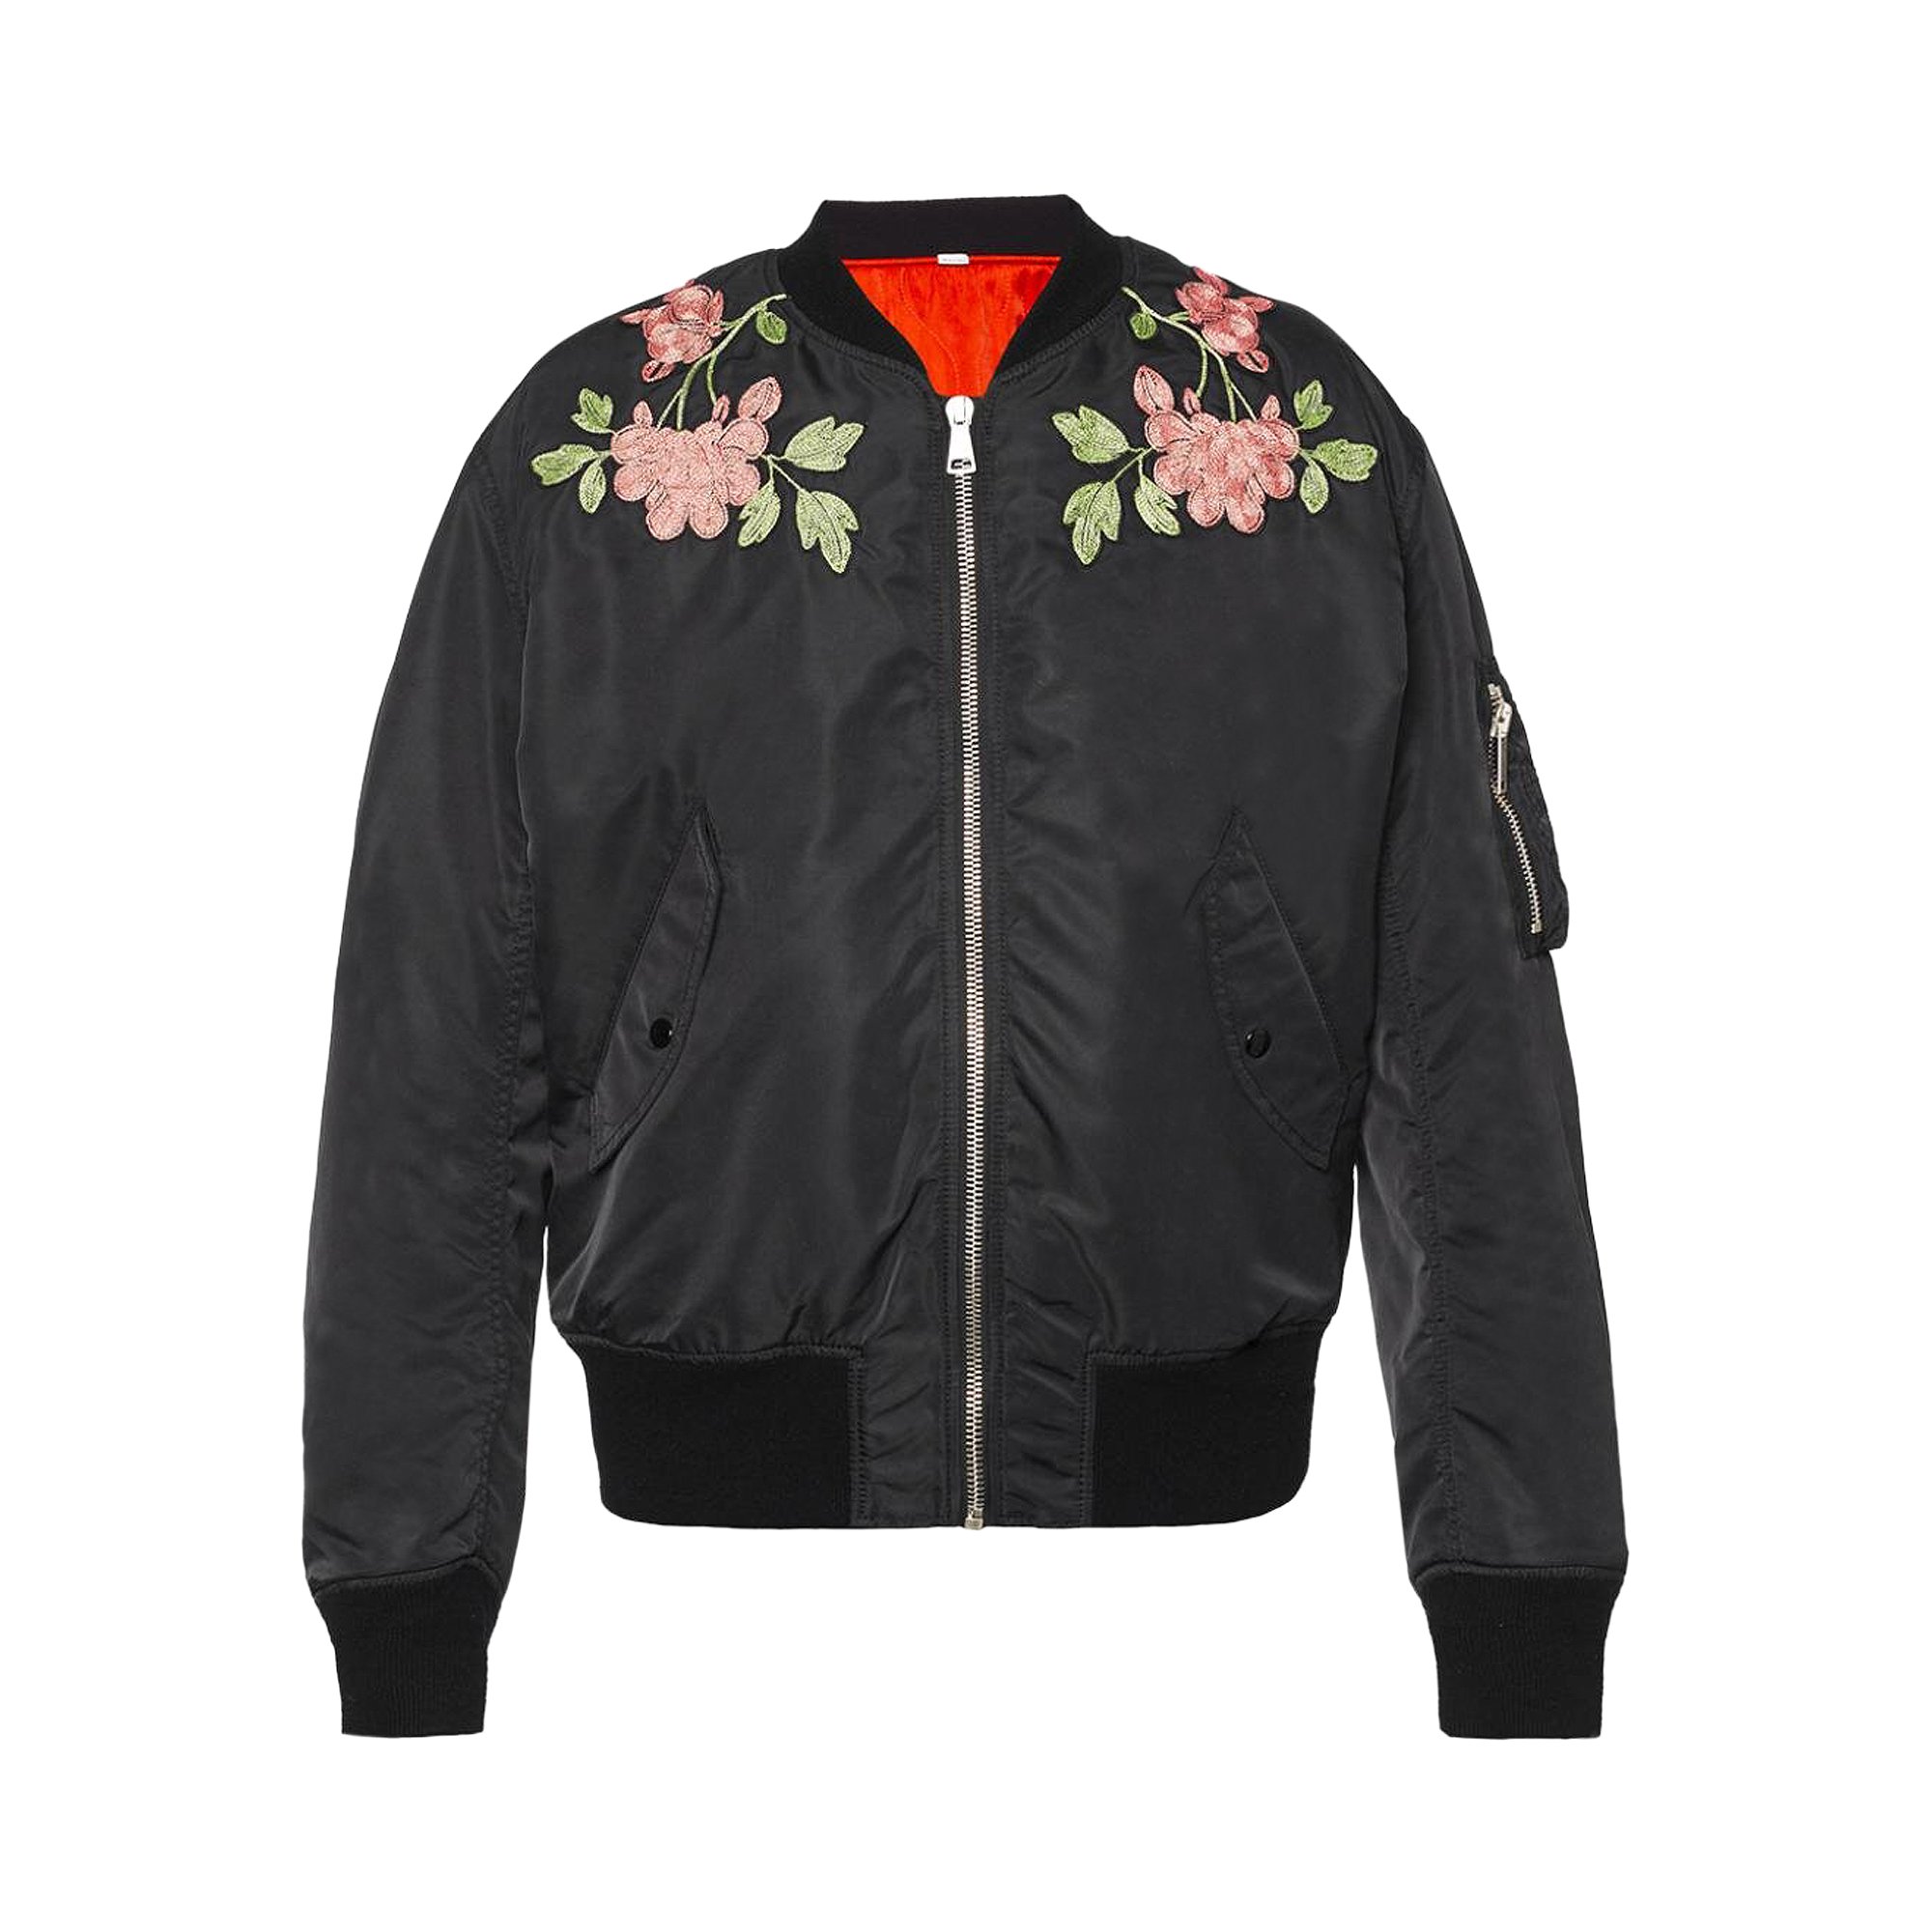 Gucci Reversible Embroidered Bomber Jacket 'Black'